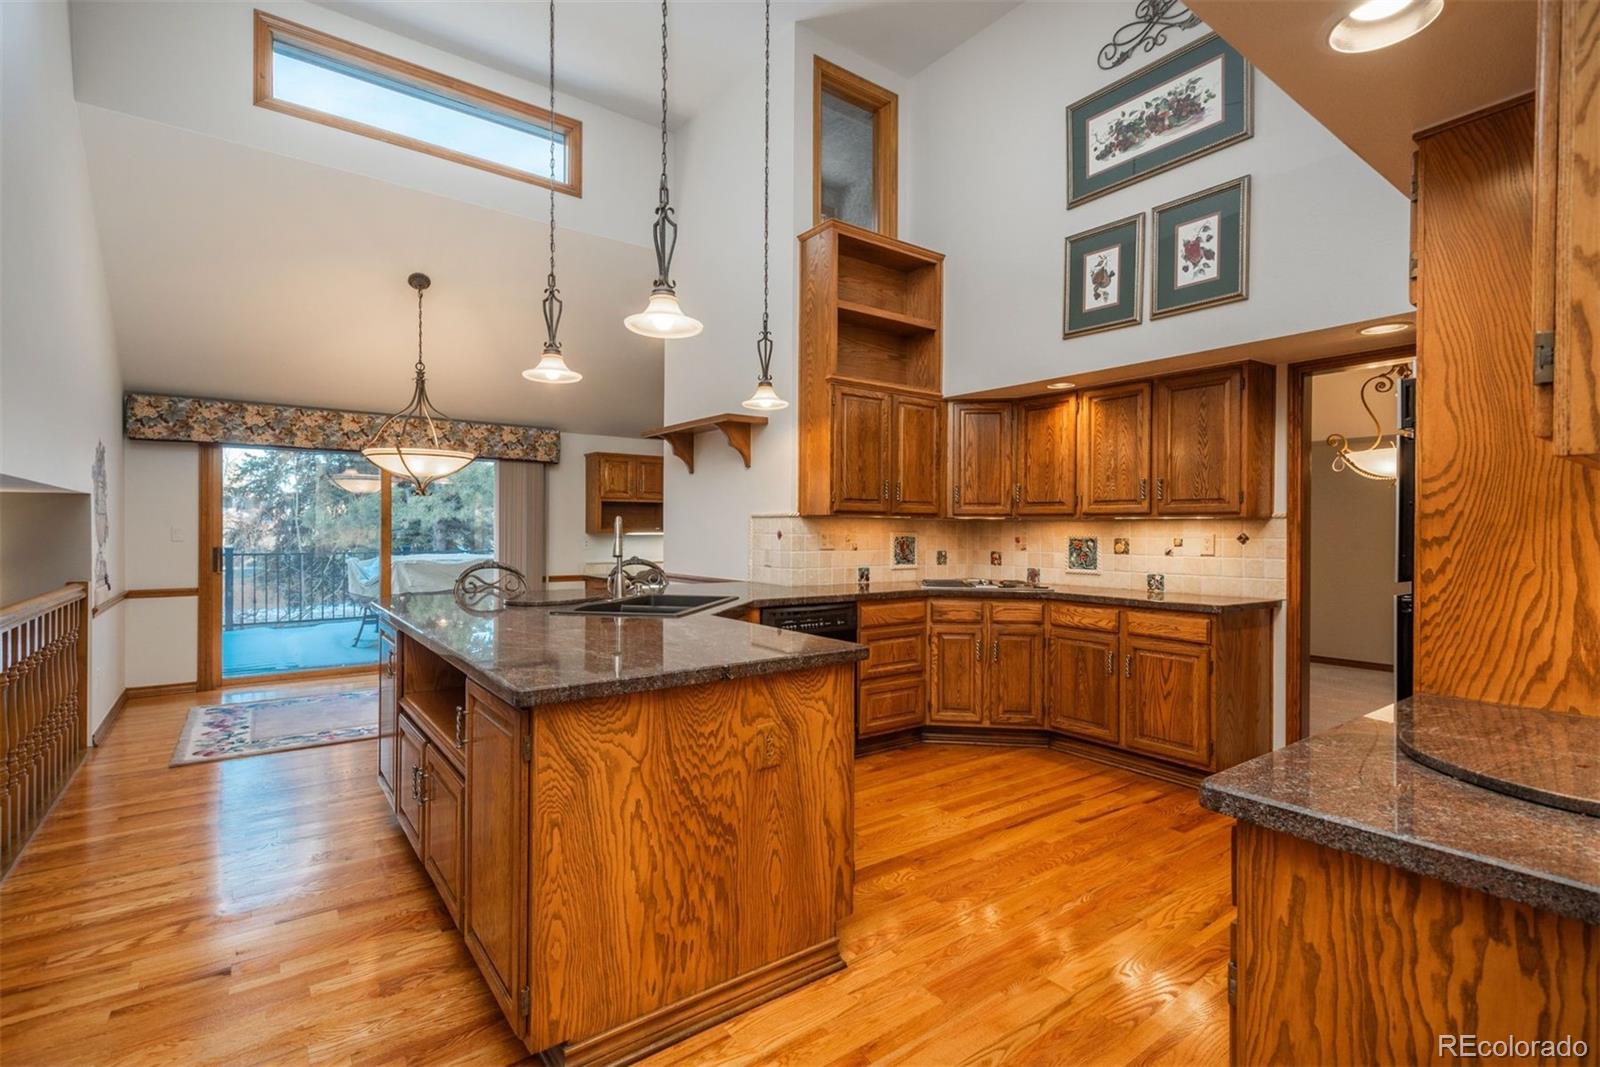 a kitchen with stainless steel appliances granite countertop a stove a sink and a wooden floors